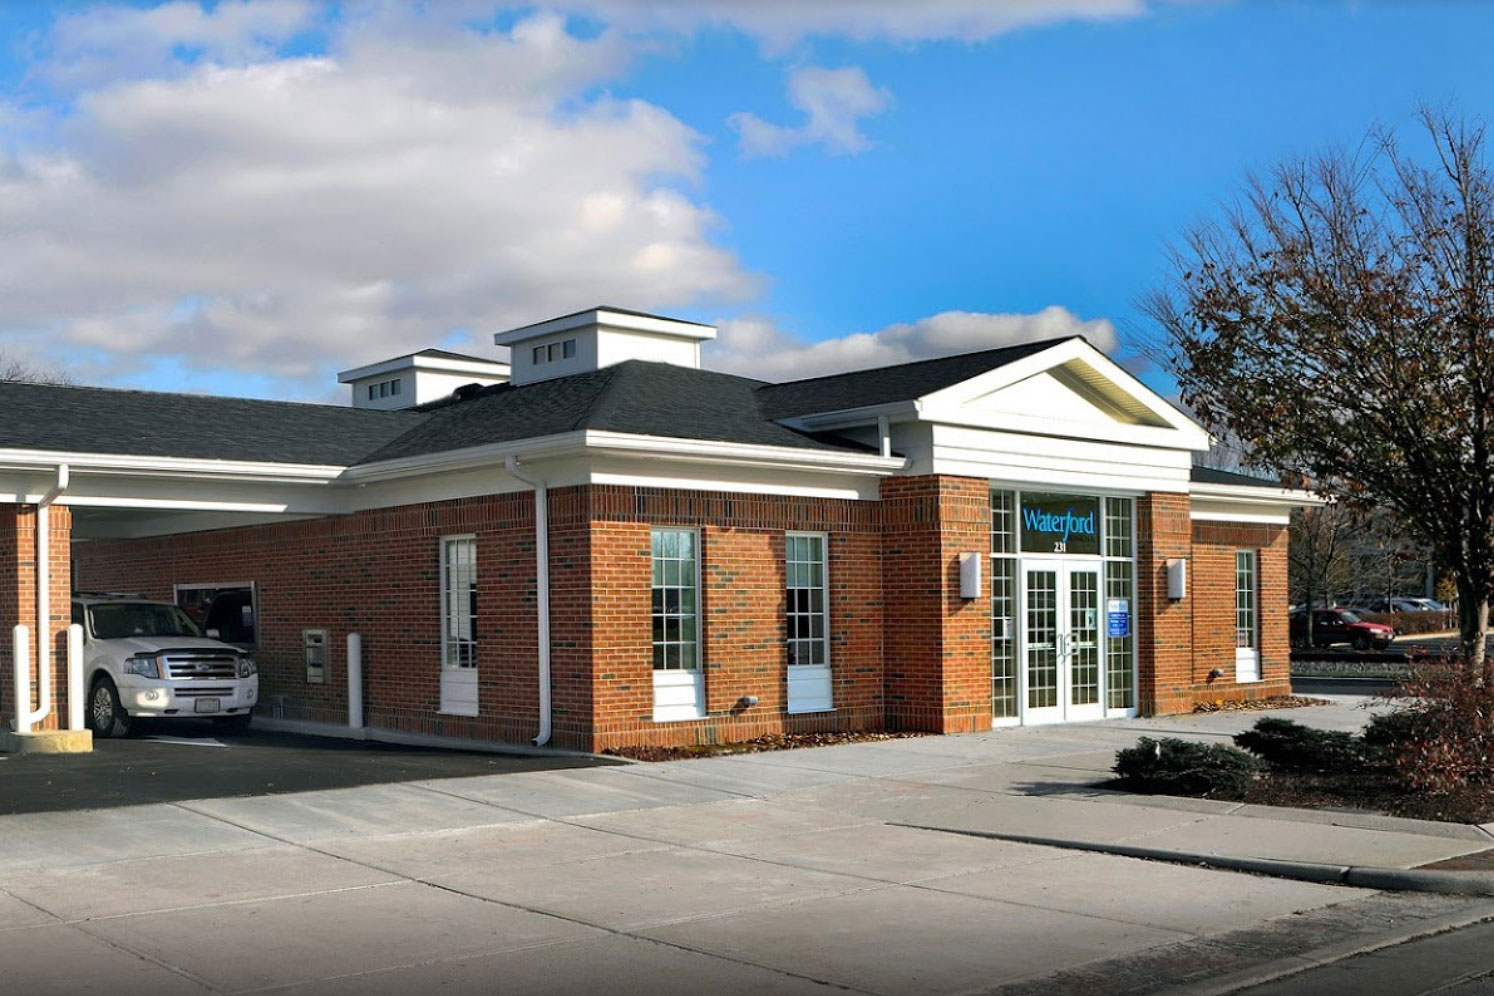 Waterford's Perrysburg Branch exterior.